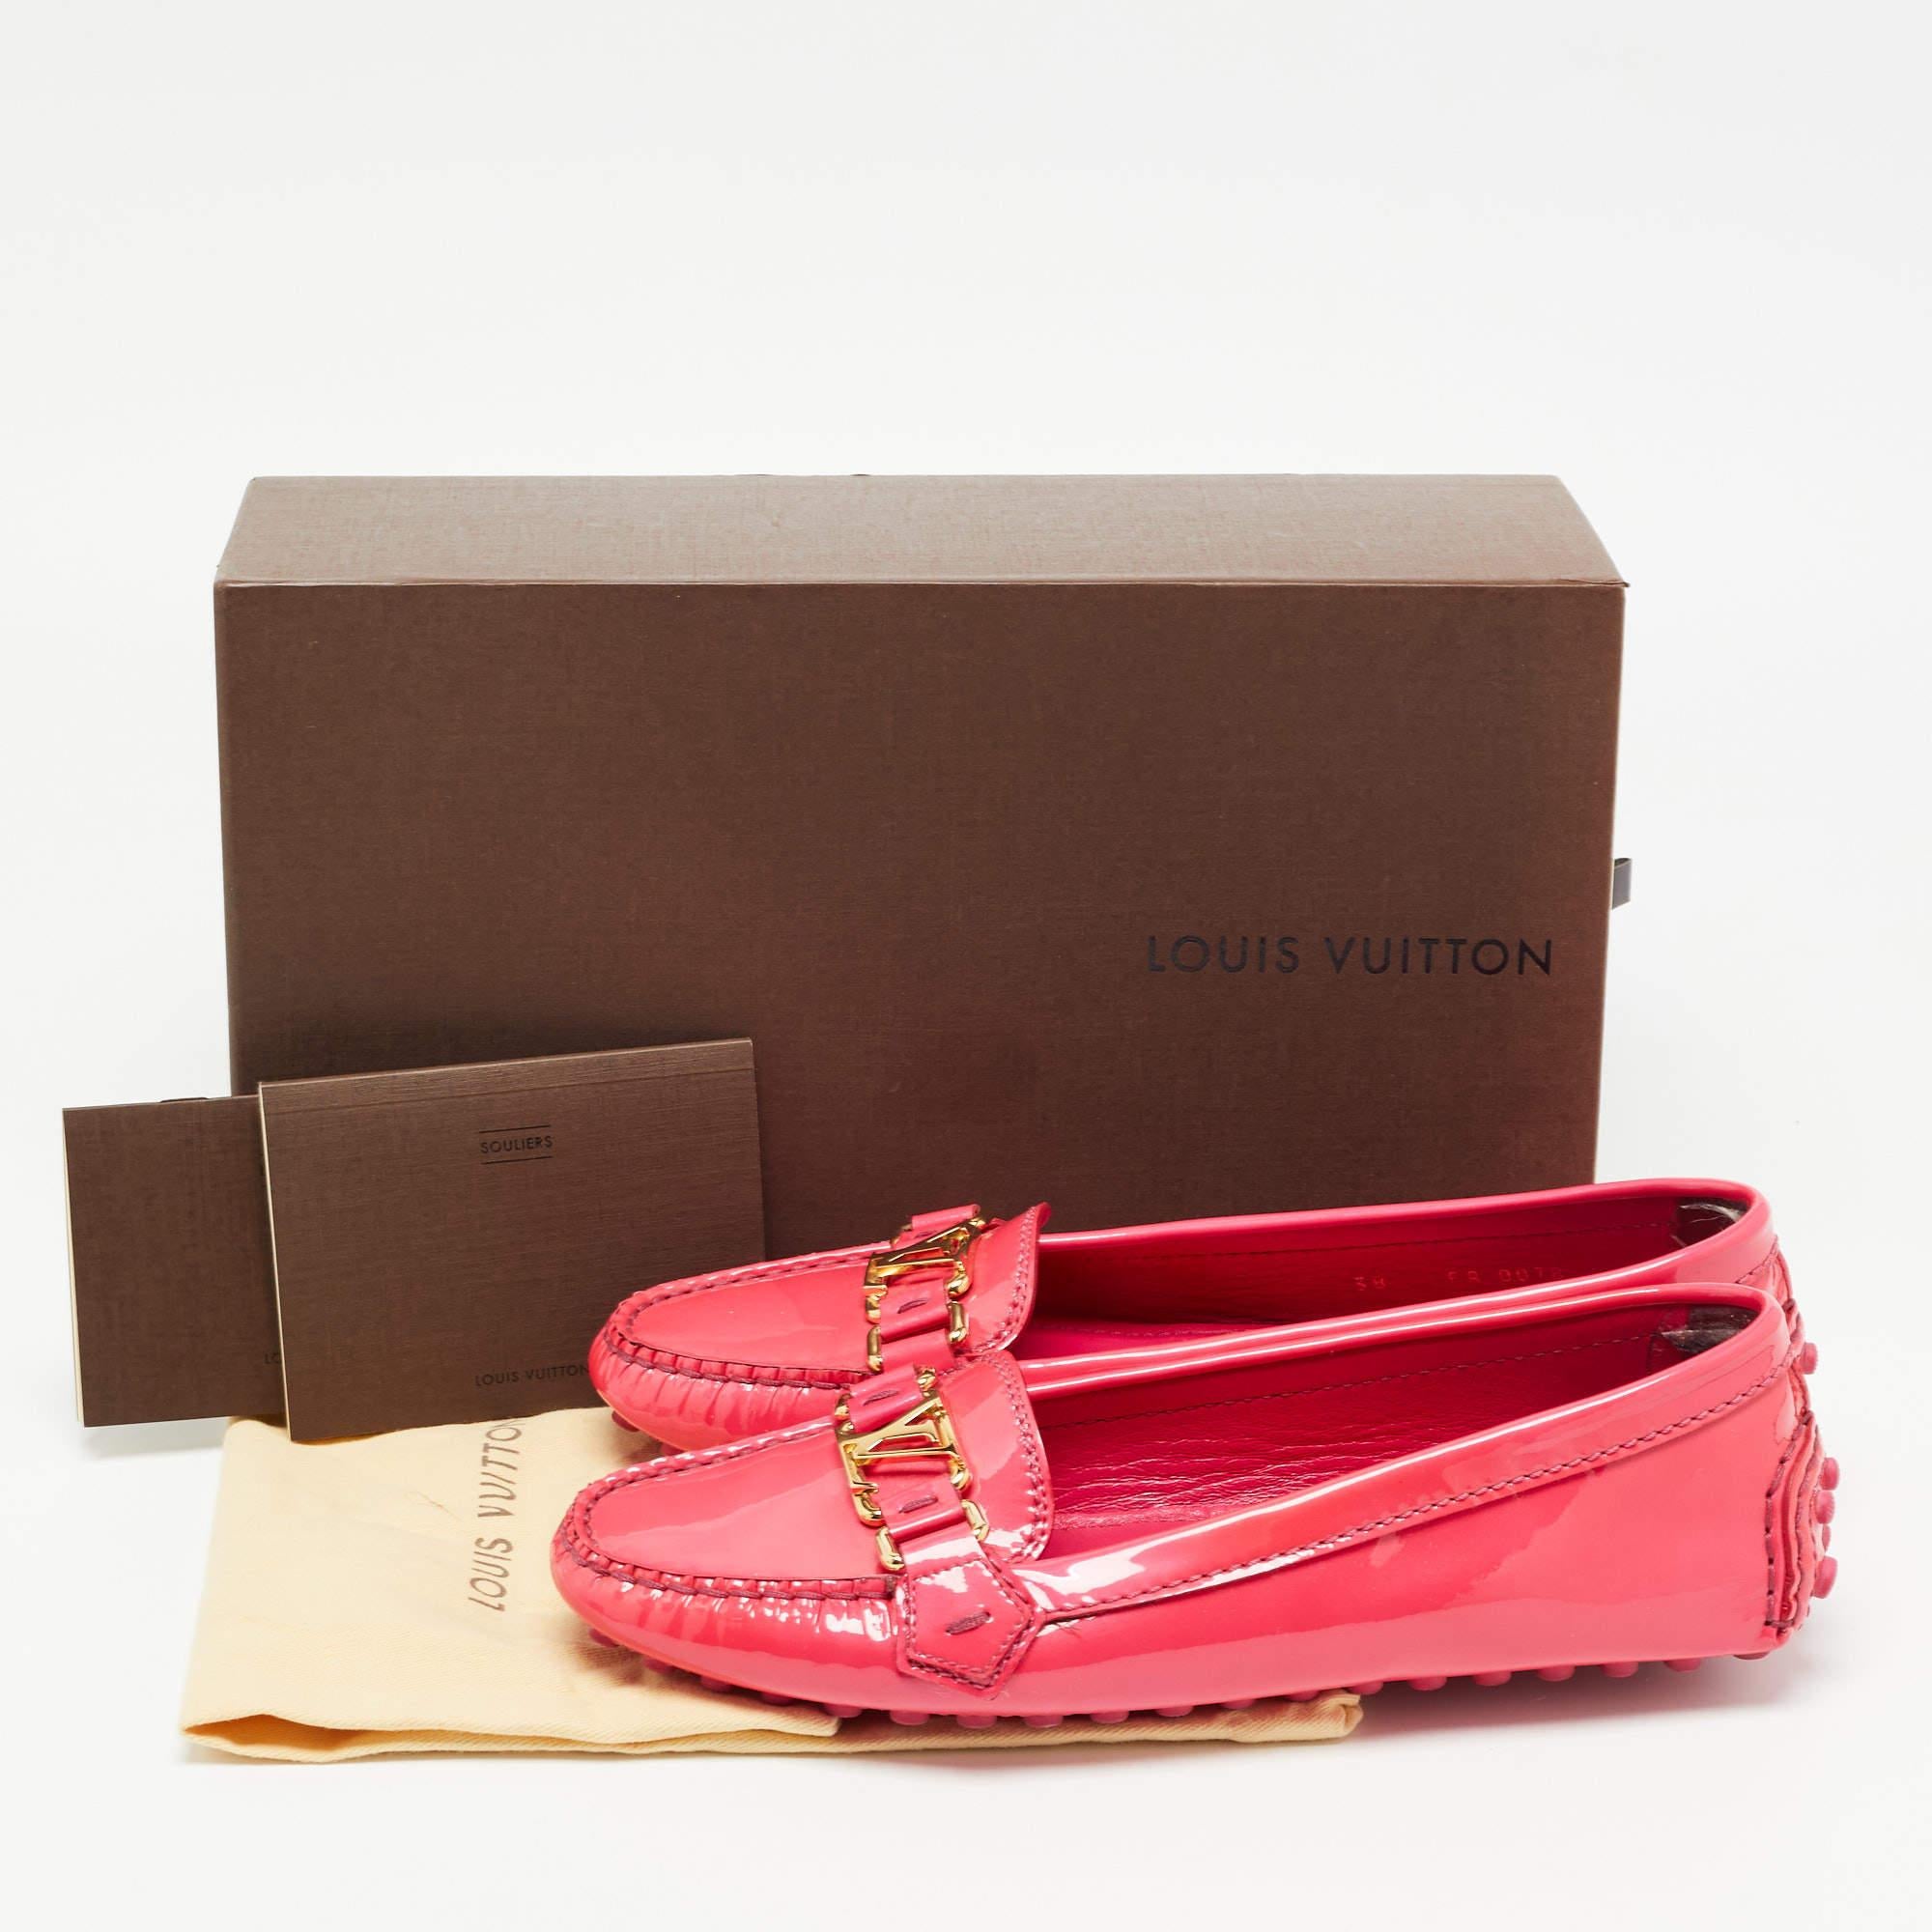 Louis Vuitton Pink Patent Leather Oxford Loafers Size 38 5